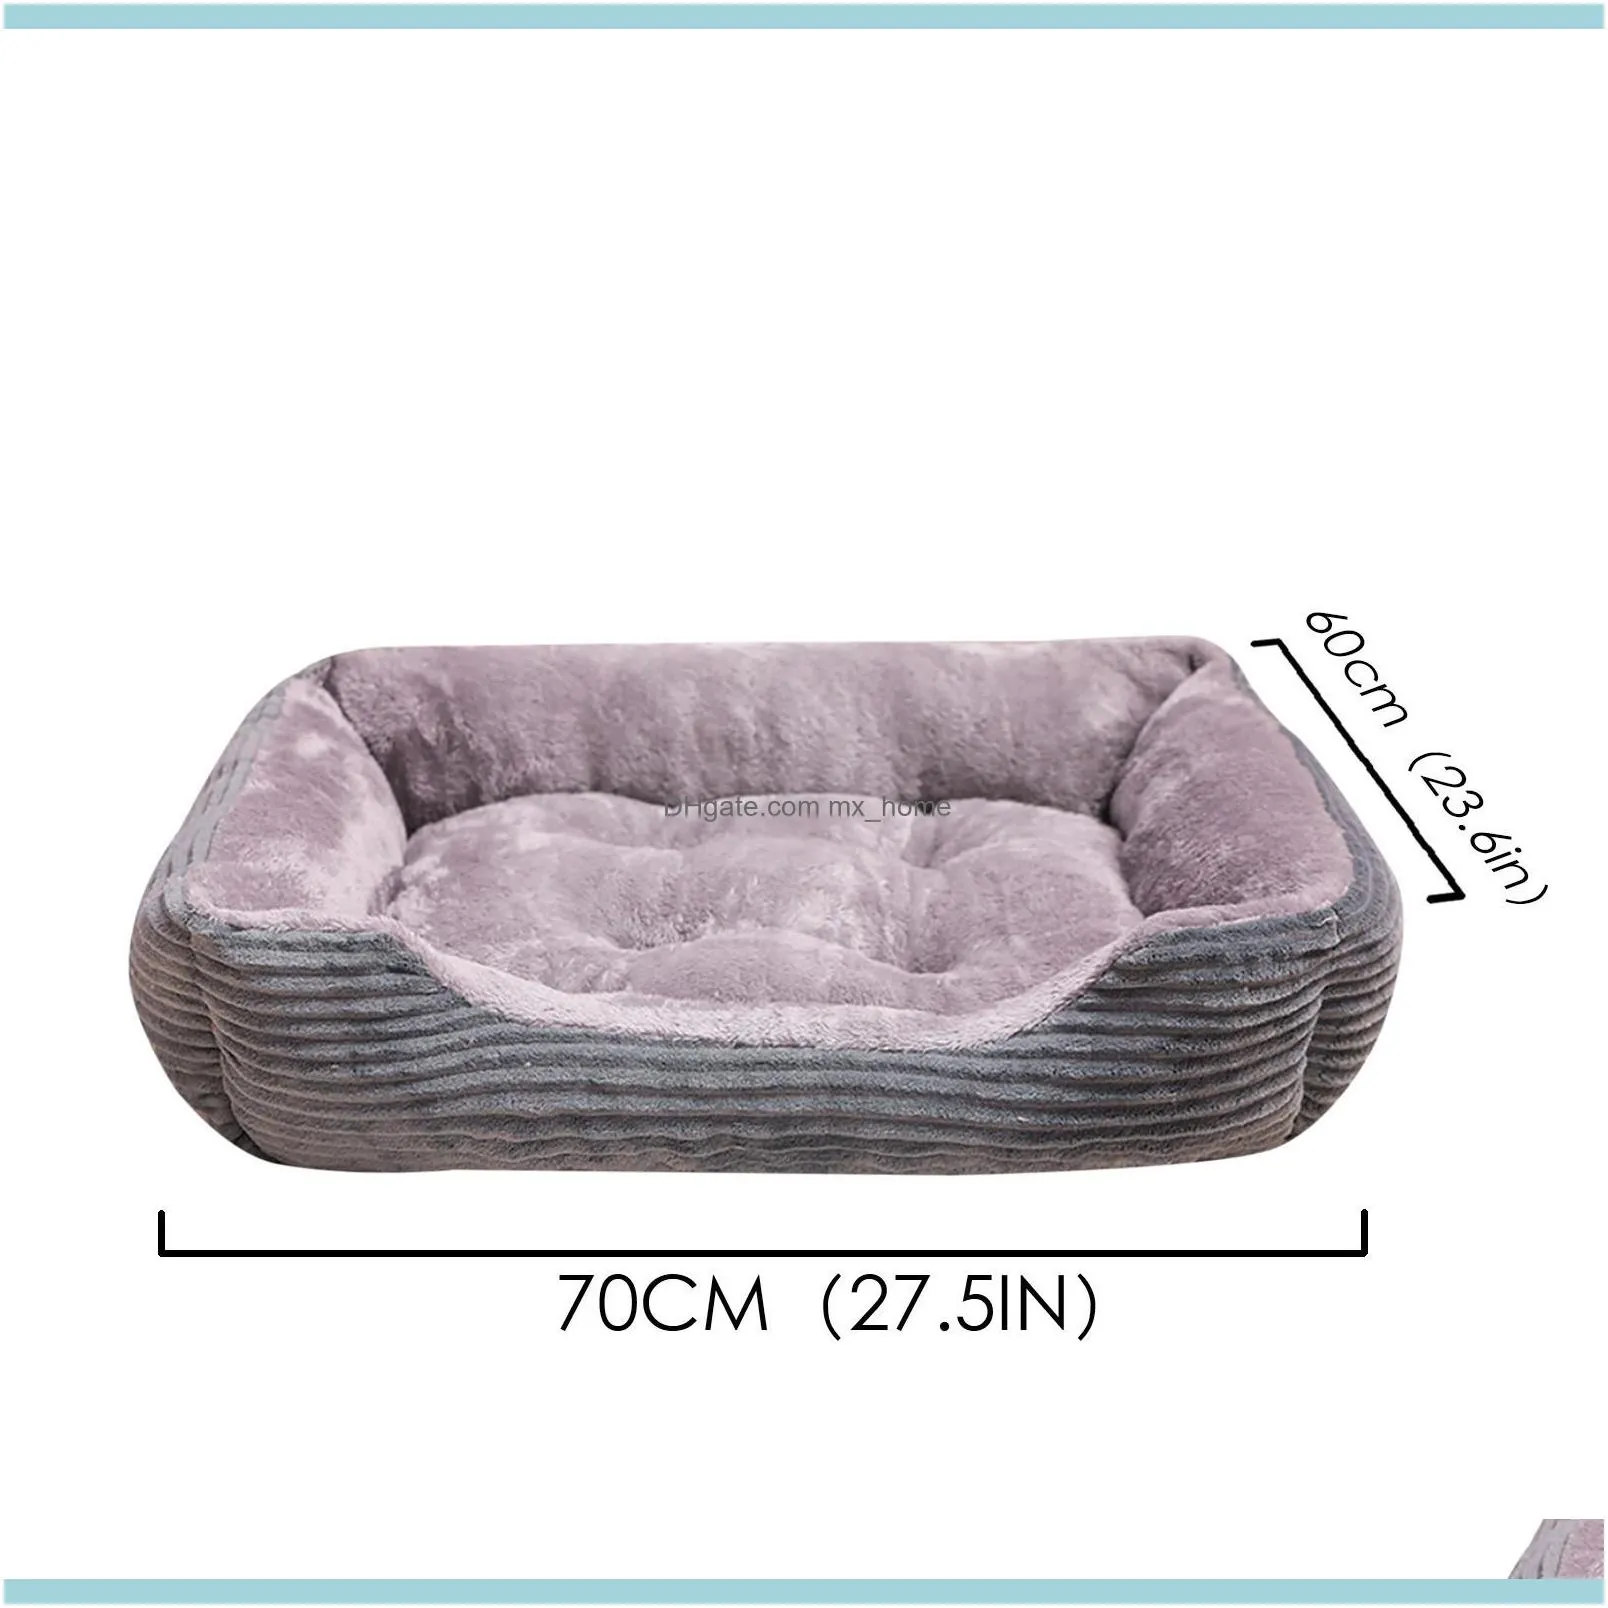 Warm bed linen Small Medium Large Dog Soft Pet Dogs Washable House For Cat Puppy Cotton Kennel Wash 201223